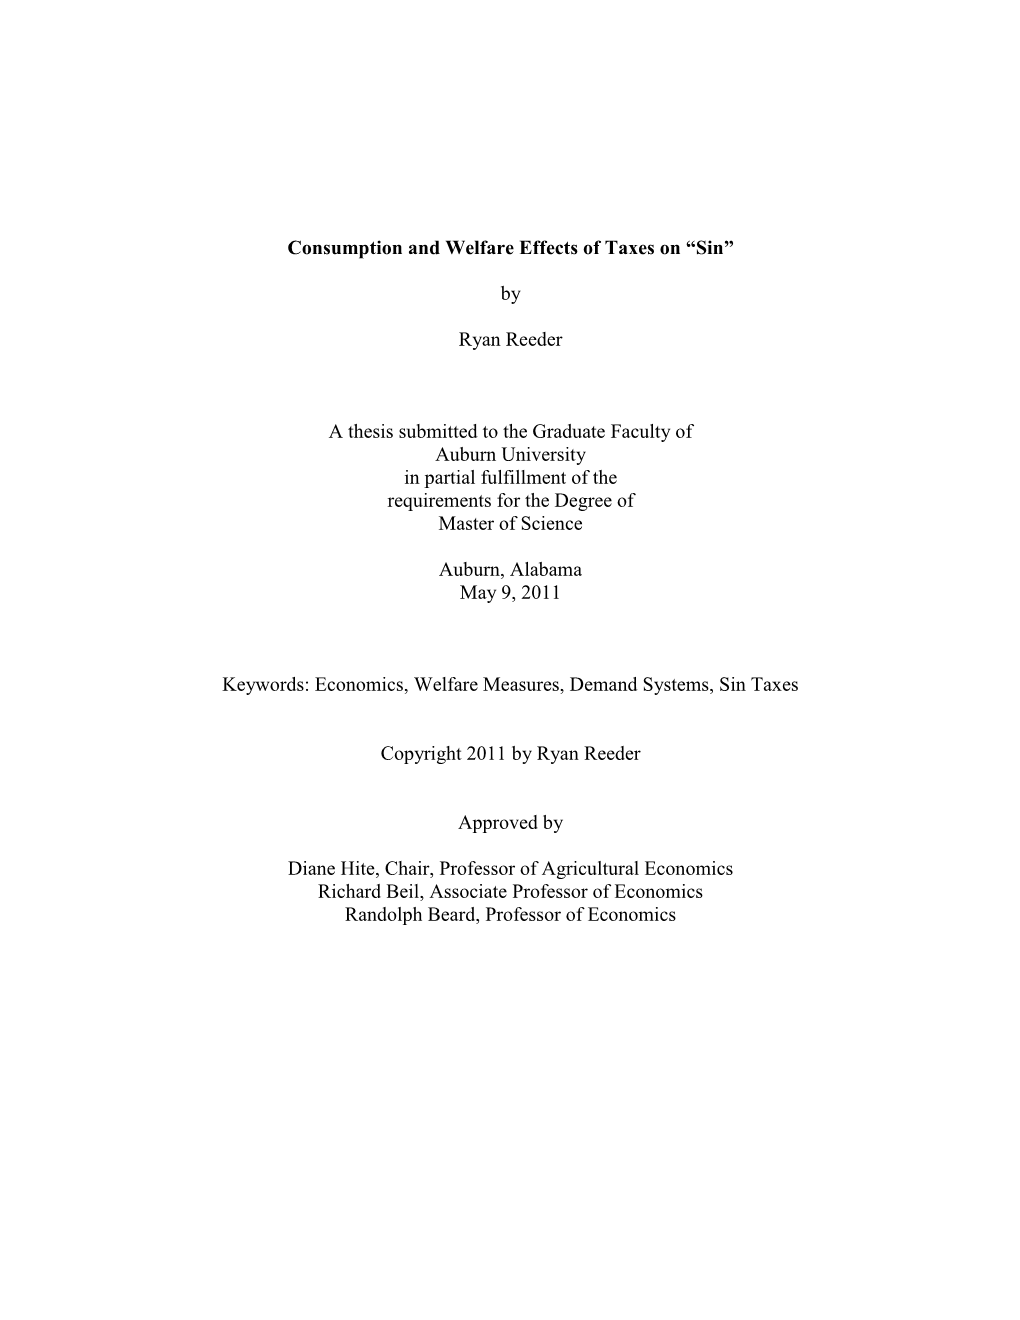 Consumption and Welfare Effects of Taxes on “Sin” by Ryan Reeder A